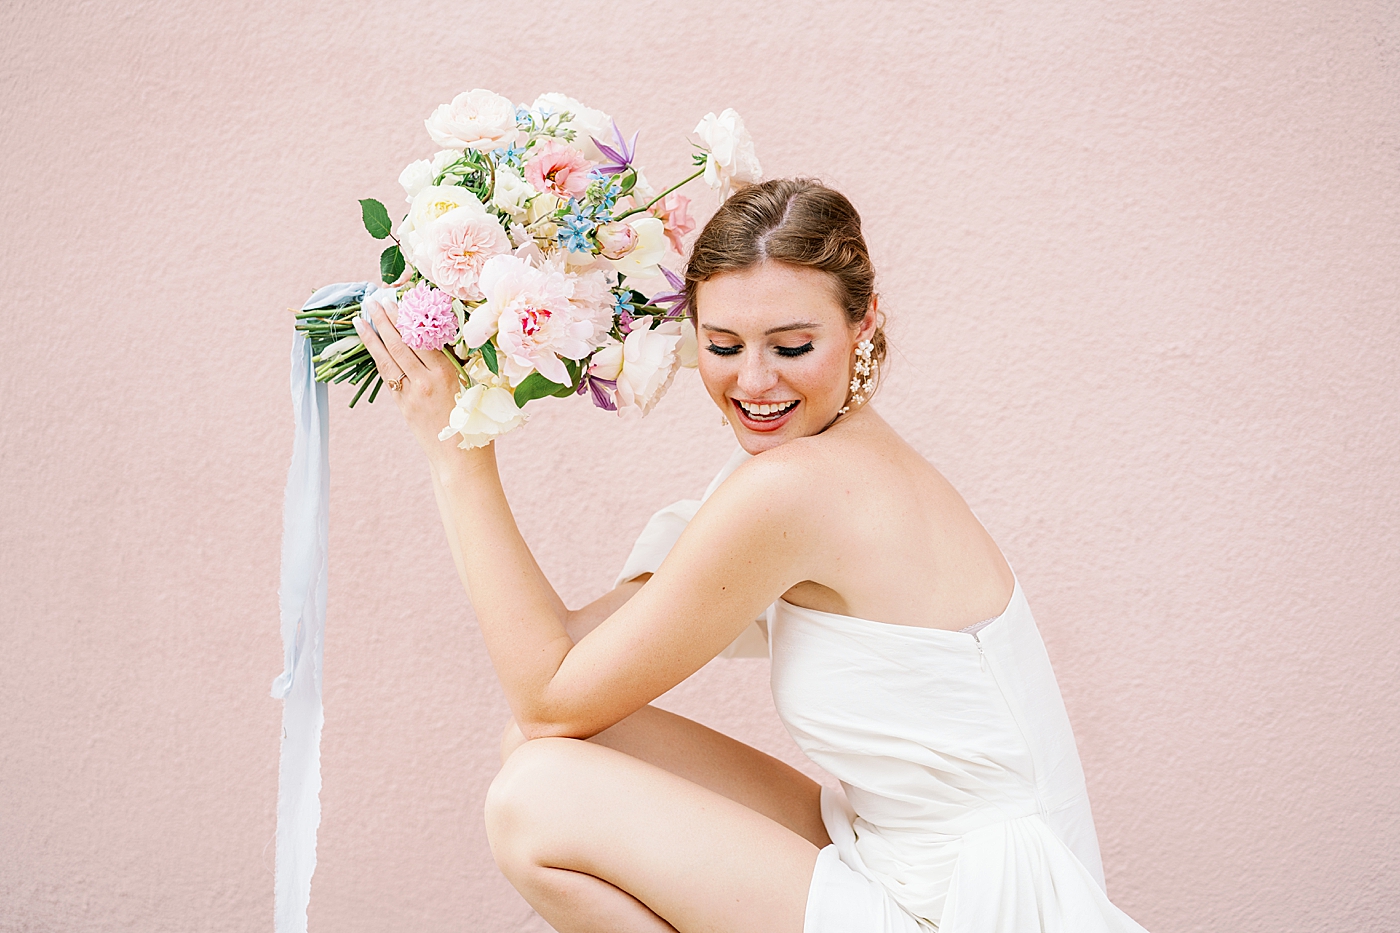 Bride smiling holding a bouquet of flowers | Images by Annie Laura Photo